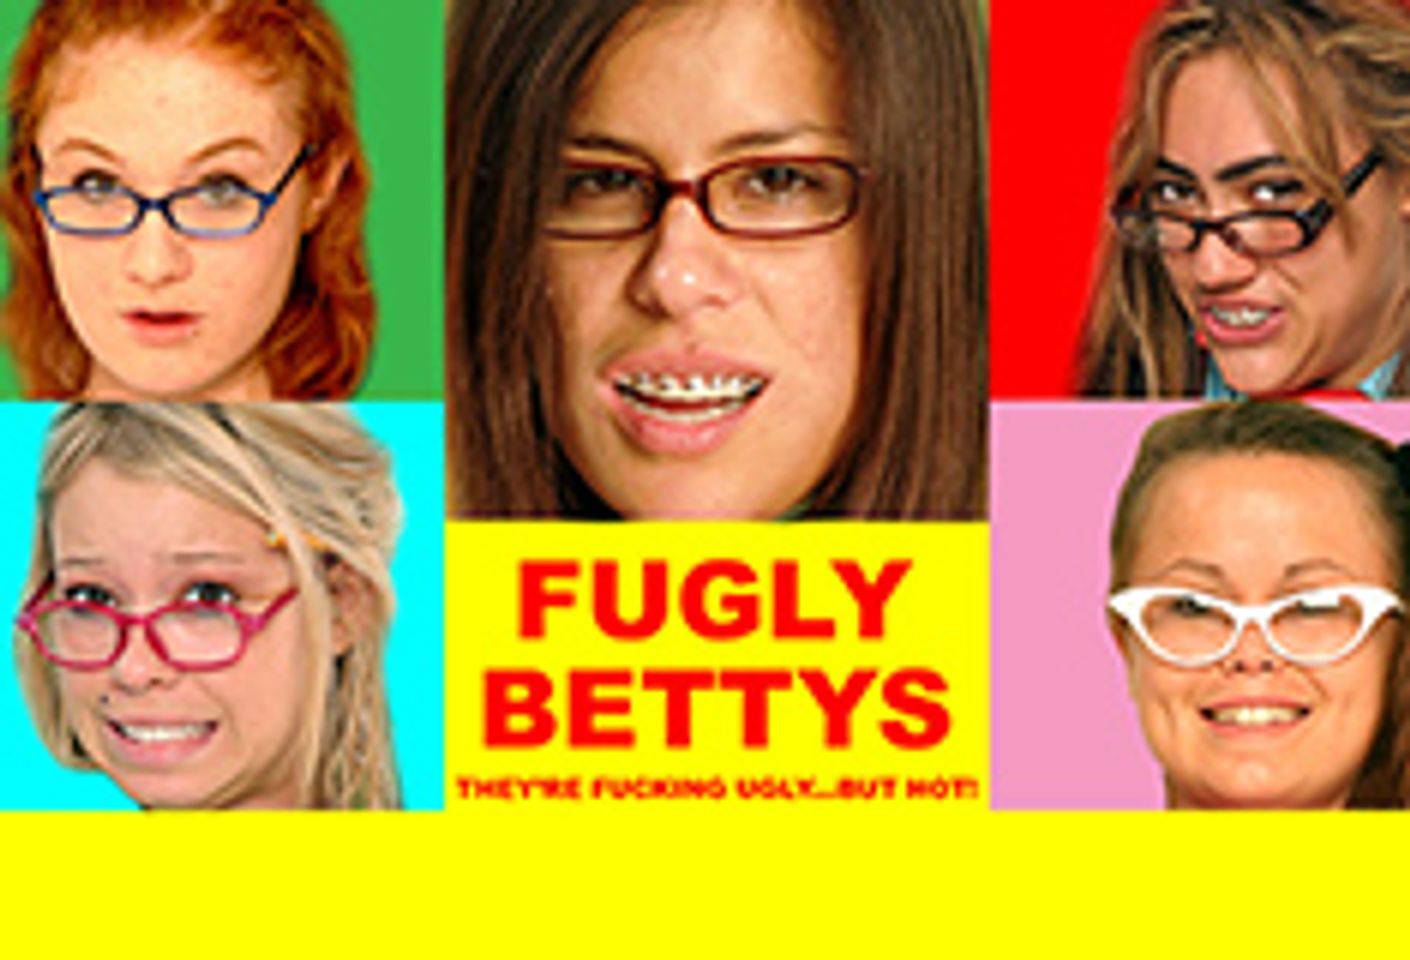 Axel Braun Directs <i>Fugly Bettys</i> for Spice